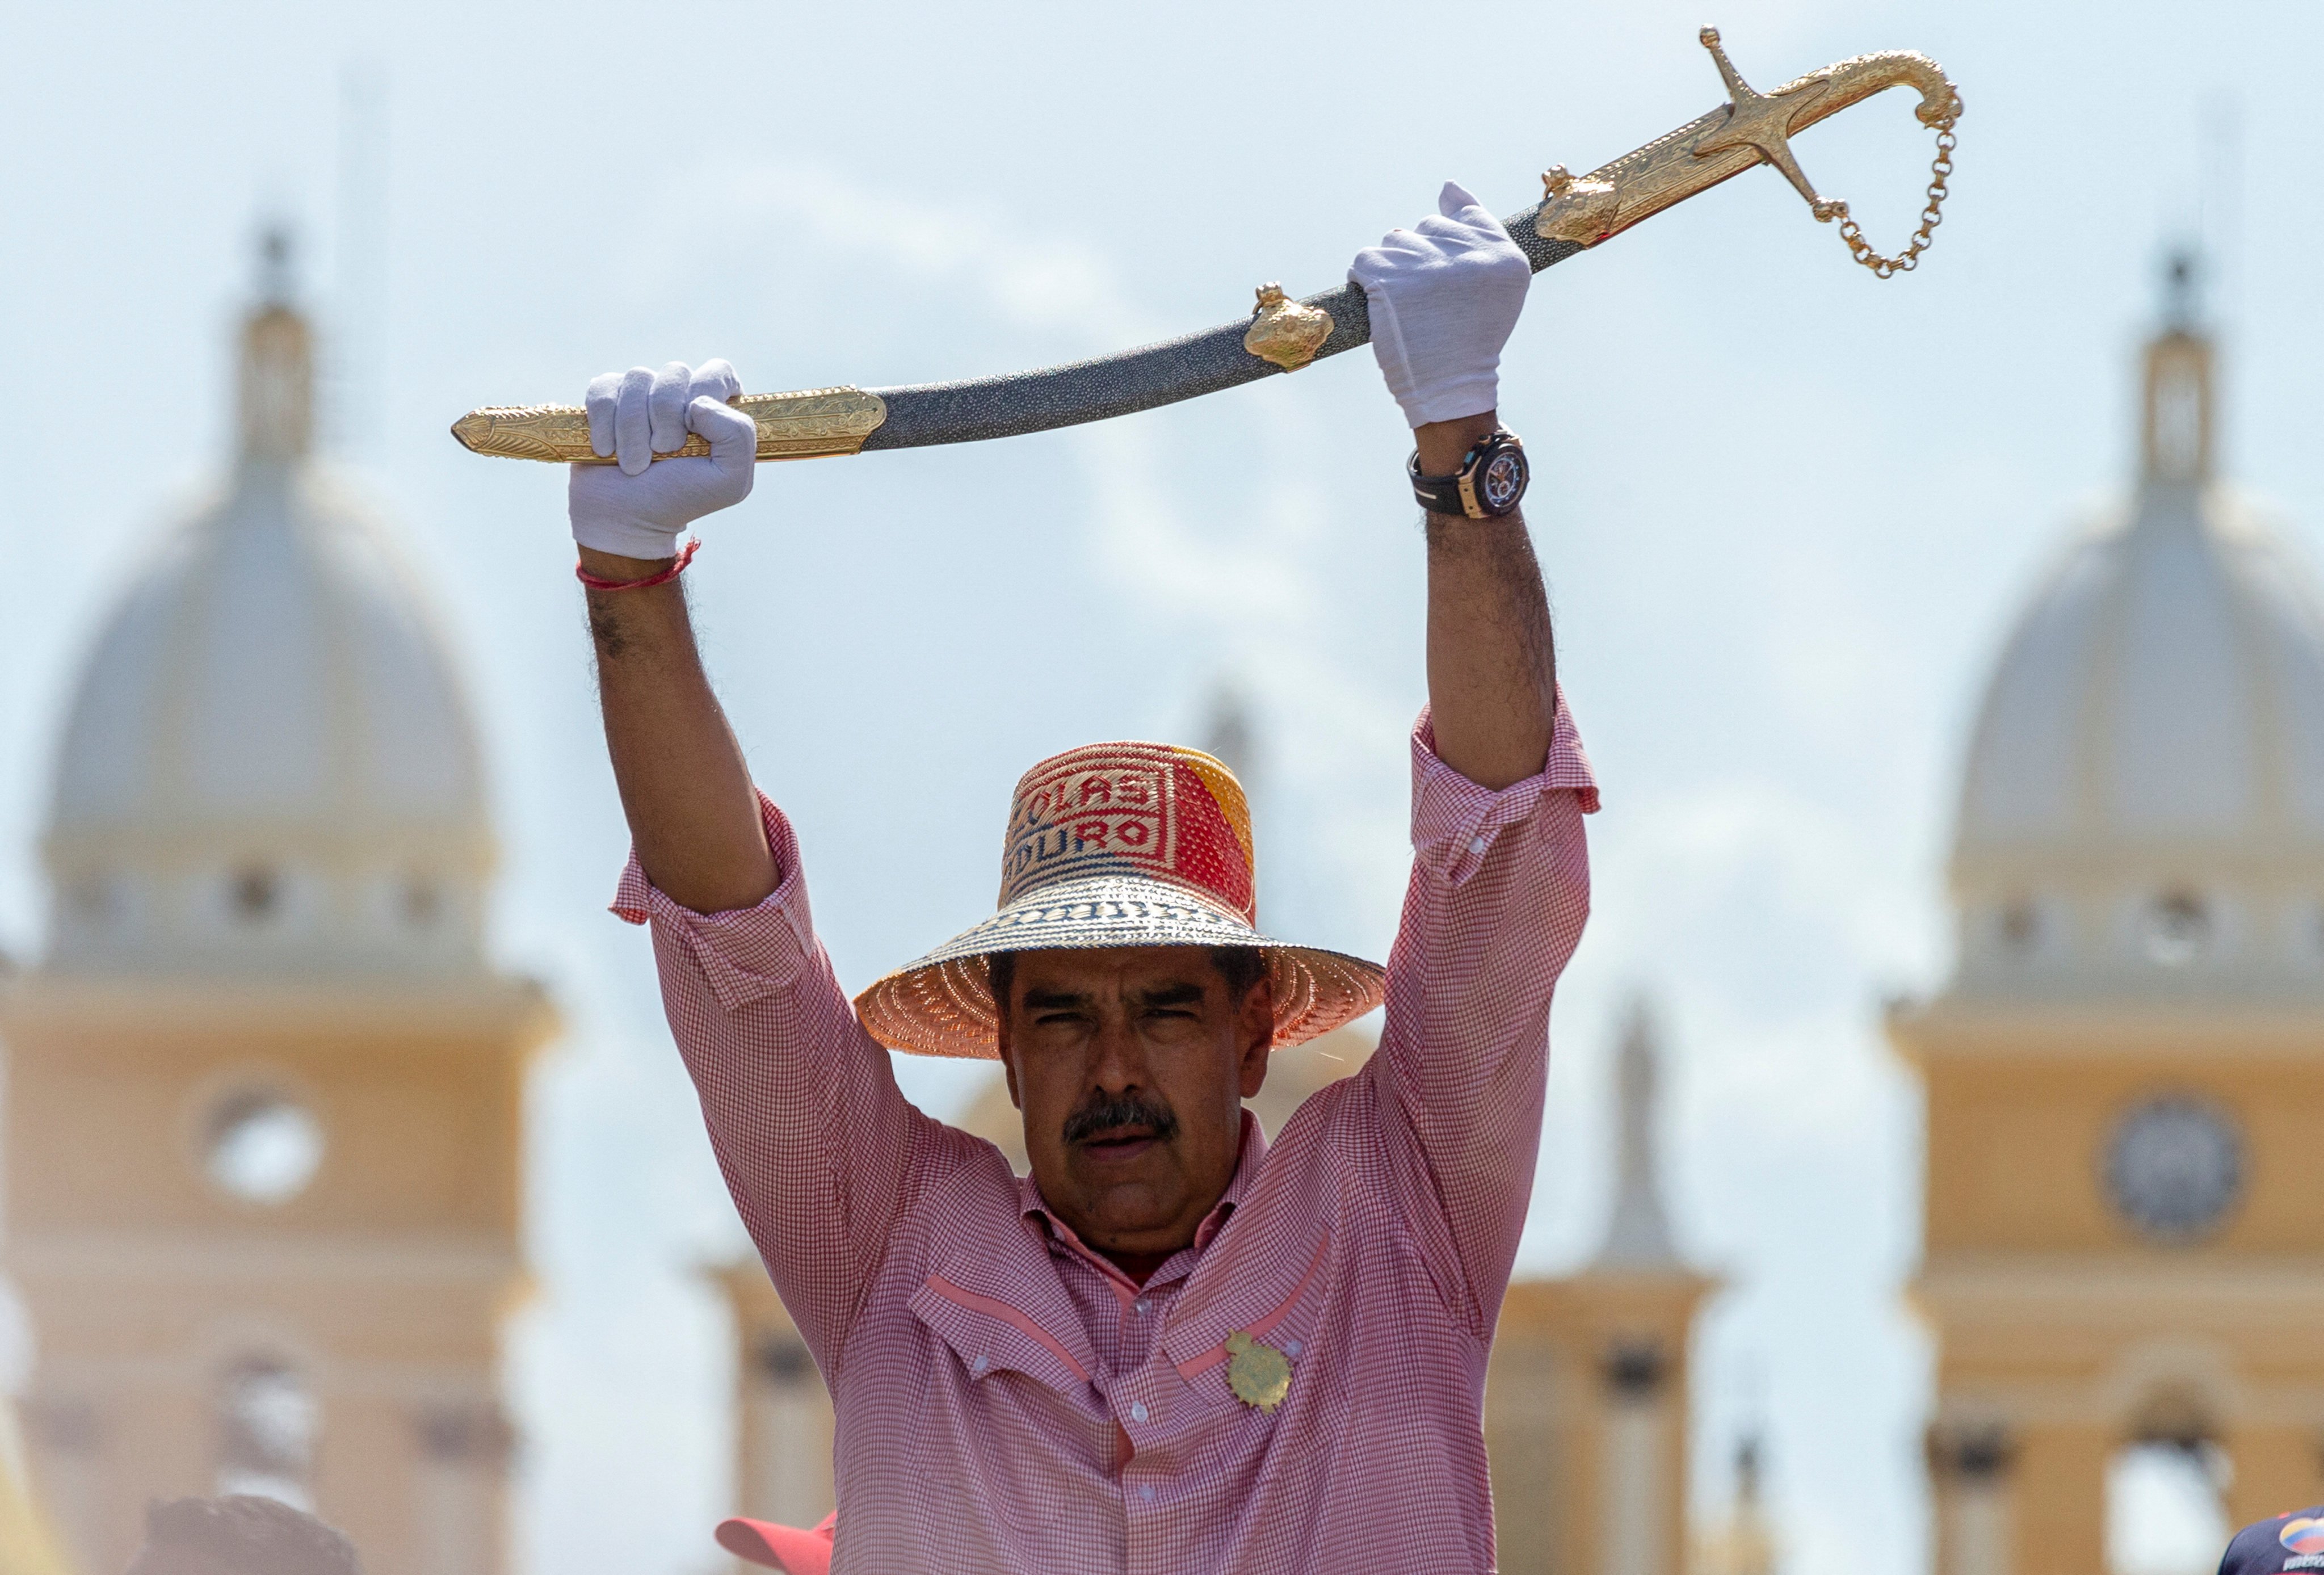 Venezuela’s President Nicolas Maduro holds the sword of independence hero Simon Bolivar during a campaign rally. Photo: Reuters